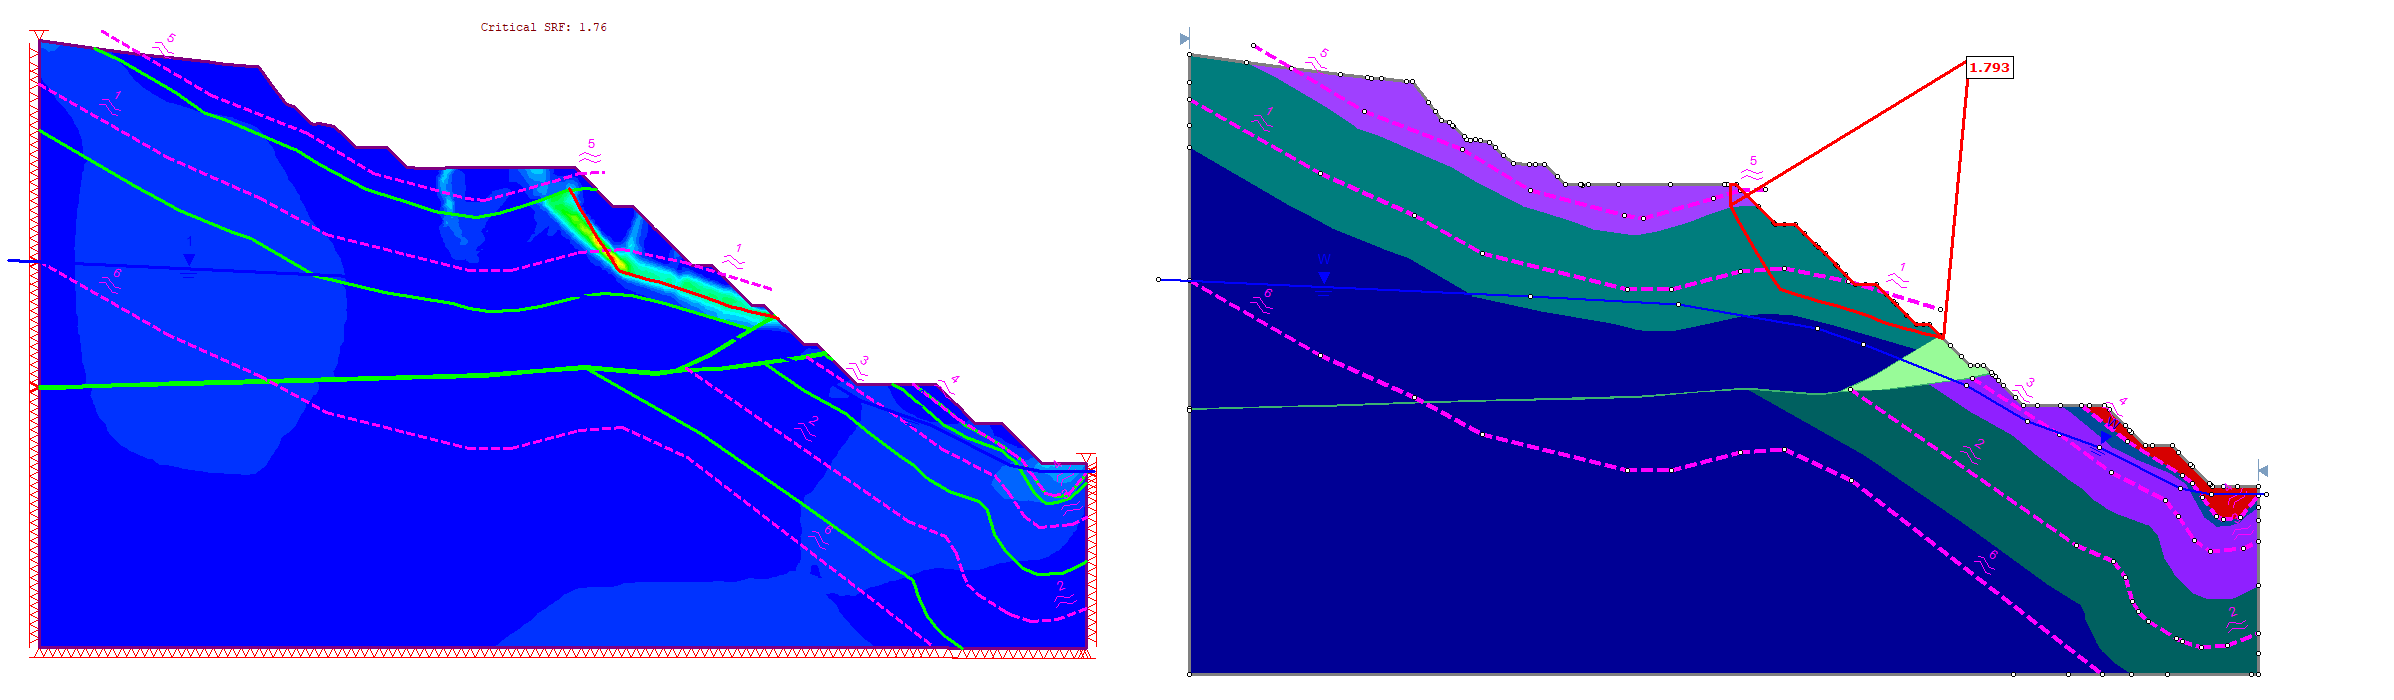 Together Slide2 and RS2 create the ultimate verification tool. Save time by seamlessly transitioning your slope models between Slide2 and RS2. By sharing a materials library, running your stability analyses means you will get the most accurate comparison between your LE and FE analysis results.